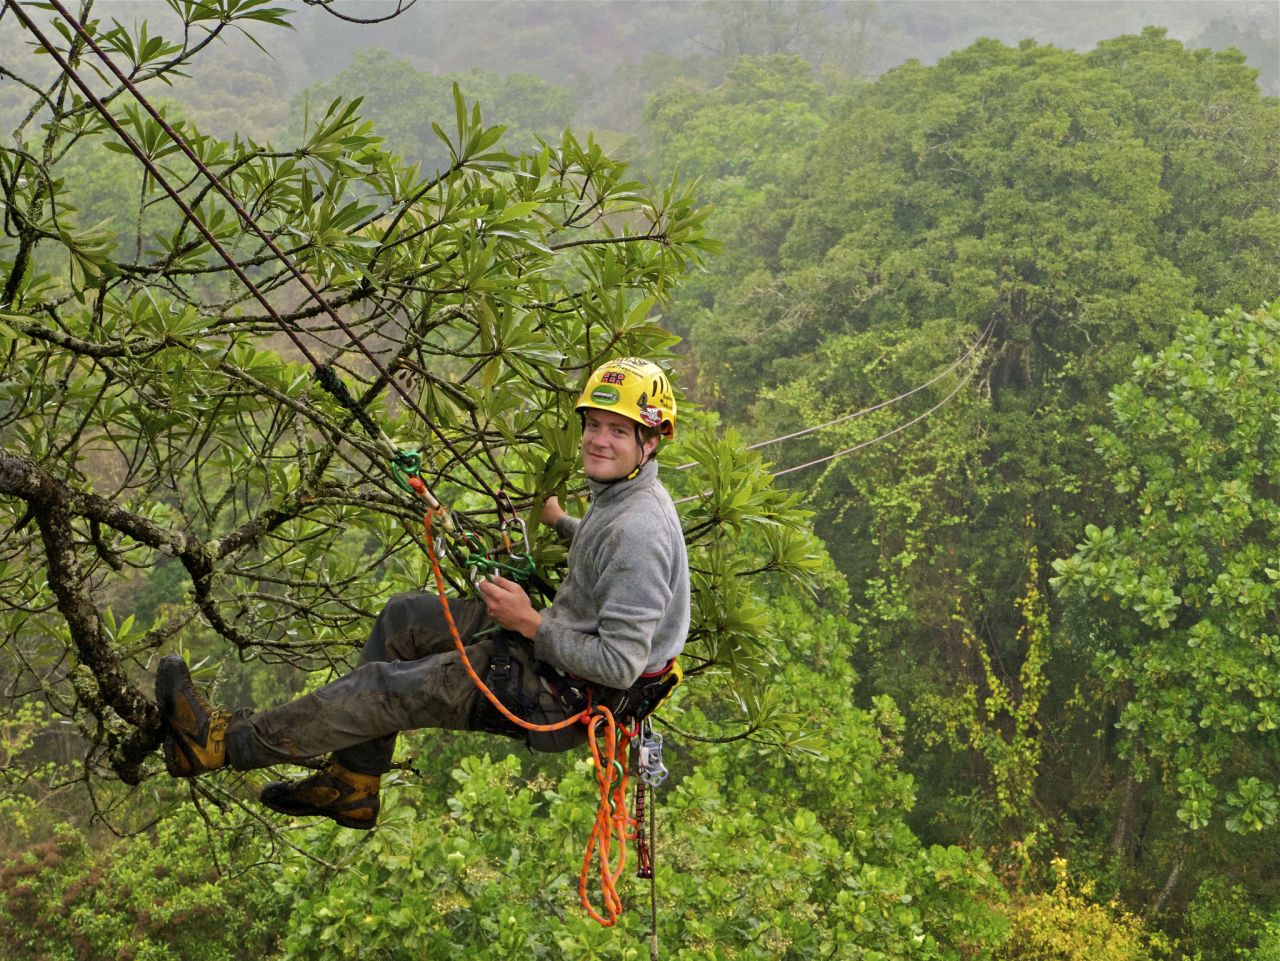 Launched by David Wiles (pictured), the <a href="http://exploretrees.com" target="_blank" target="_blank">"Explore Trees"</a> project is aiming to help highlight the need to preserve South Africa's spectacular trees.